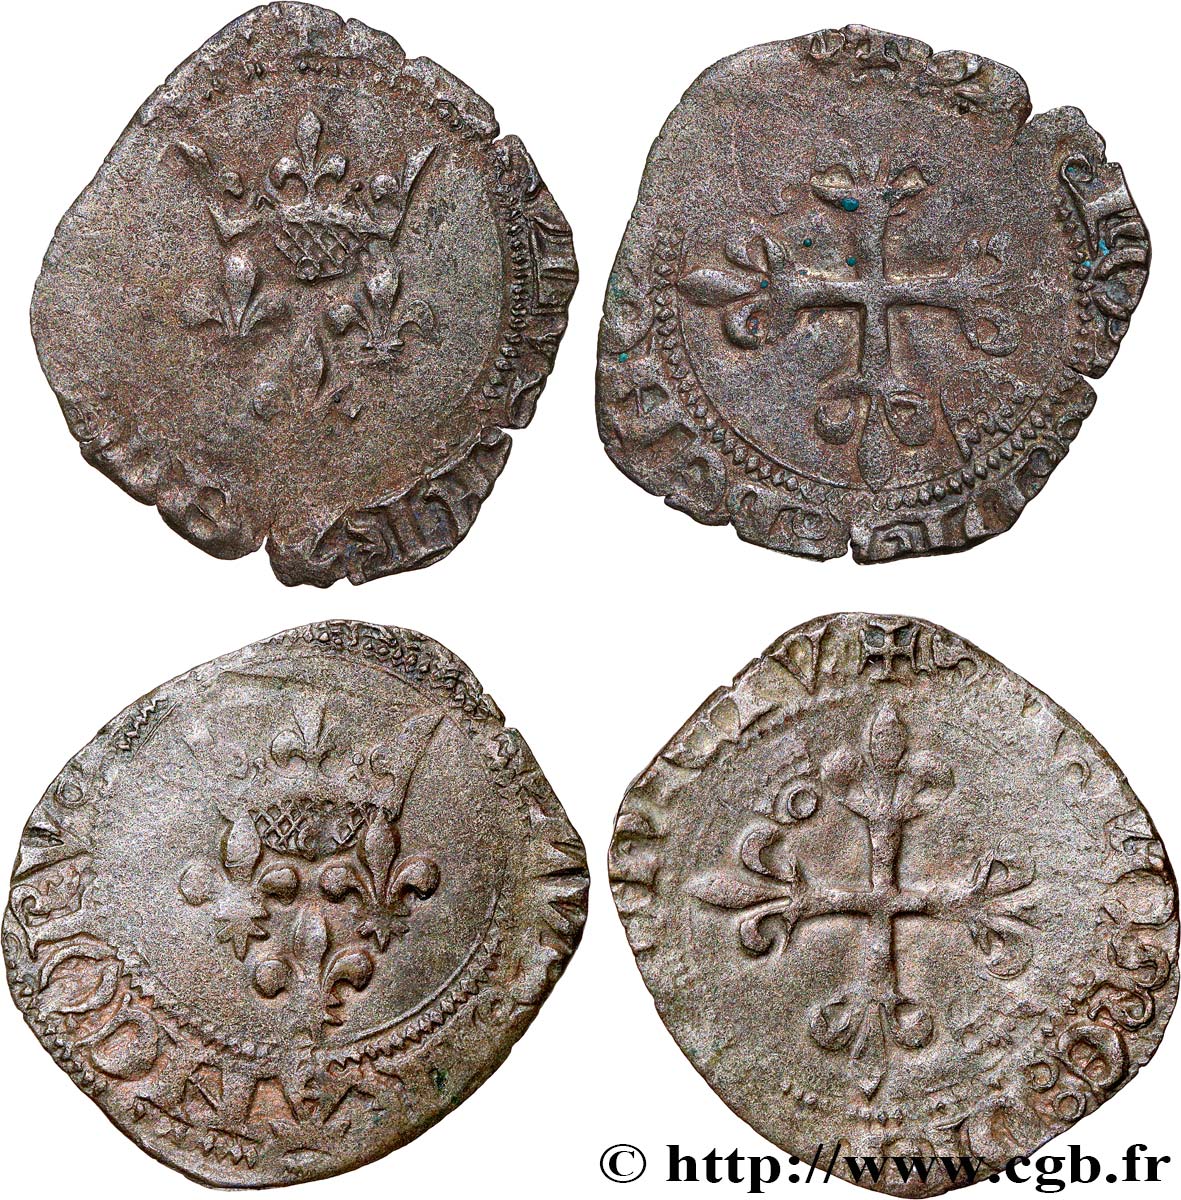 HEIR APPARENT, CHARLES, REGENCY - COINAGE IN THE NAME OF CHARLES VI Lot de 2 x gros dit  florette  n.d. Atelier divers VF